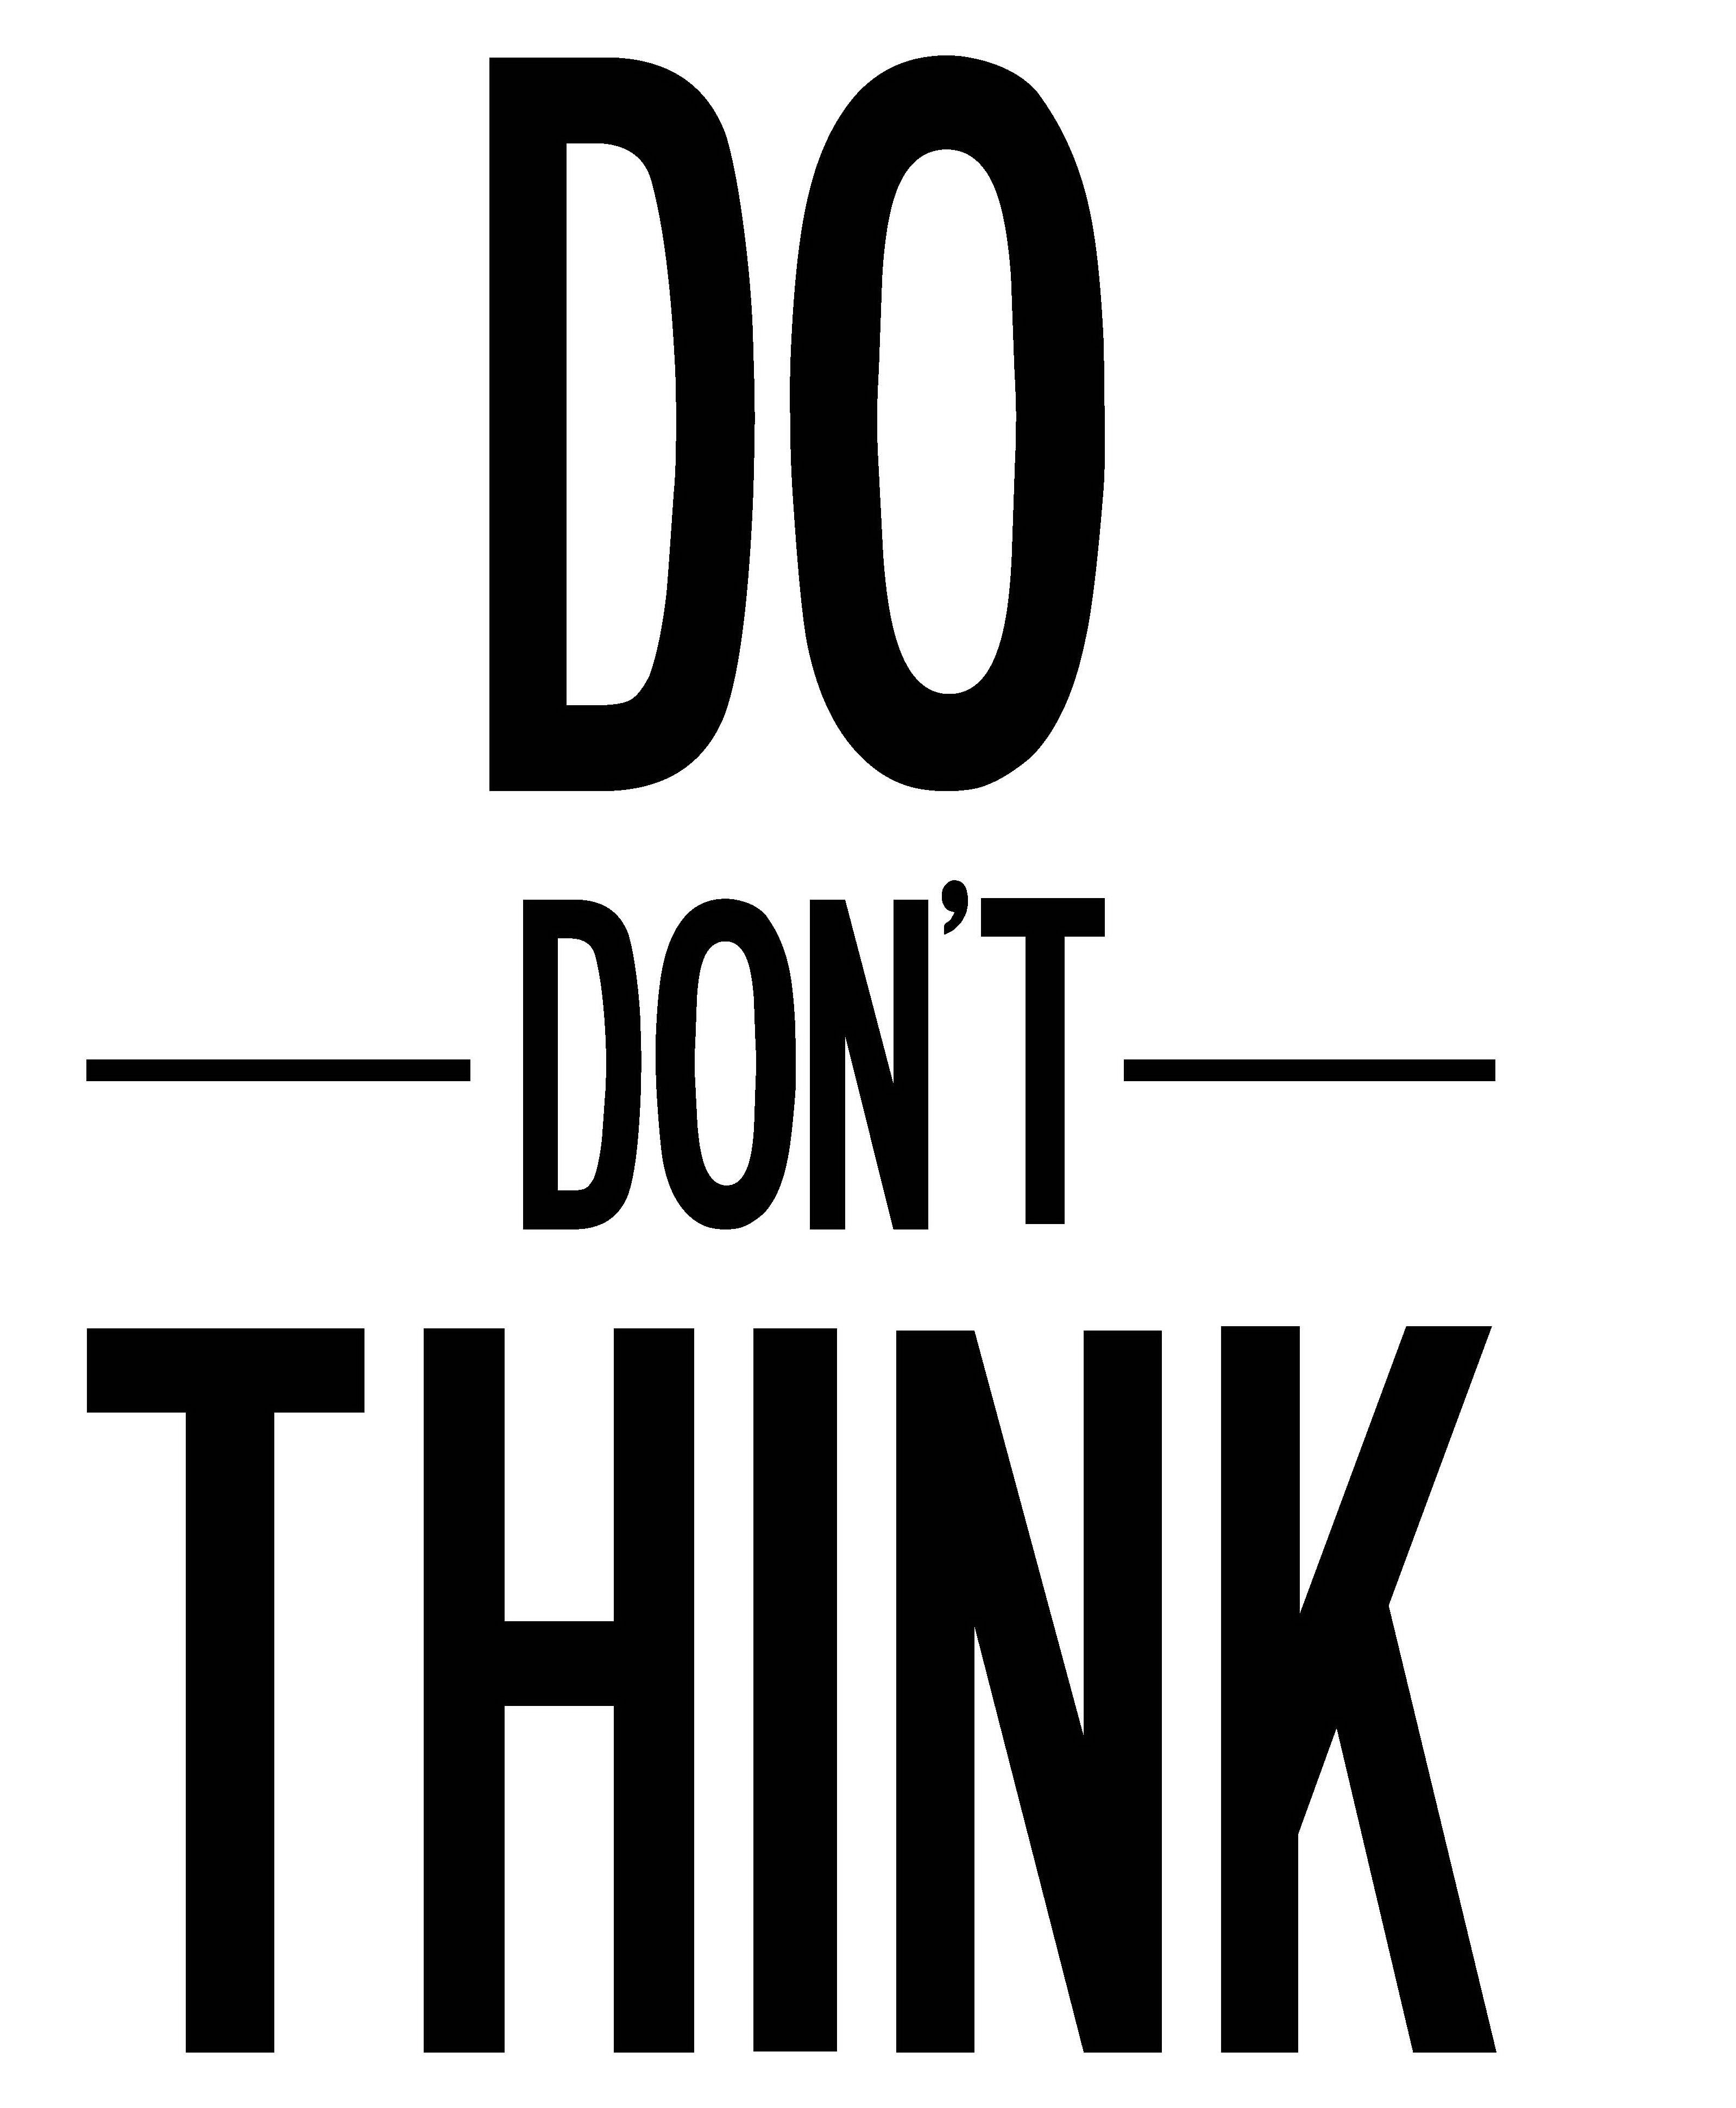  DO DON'T THINK